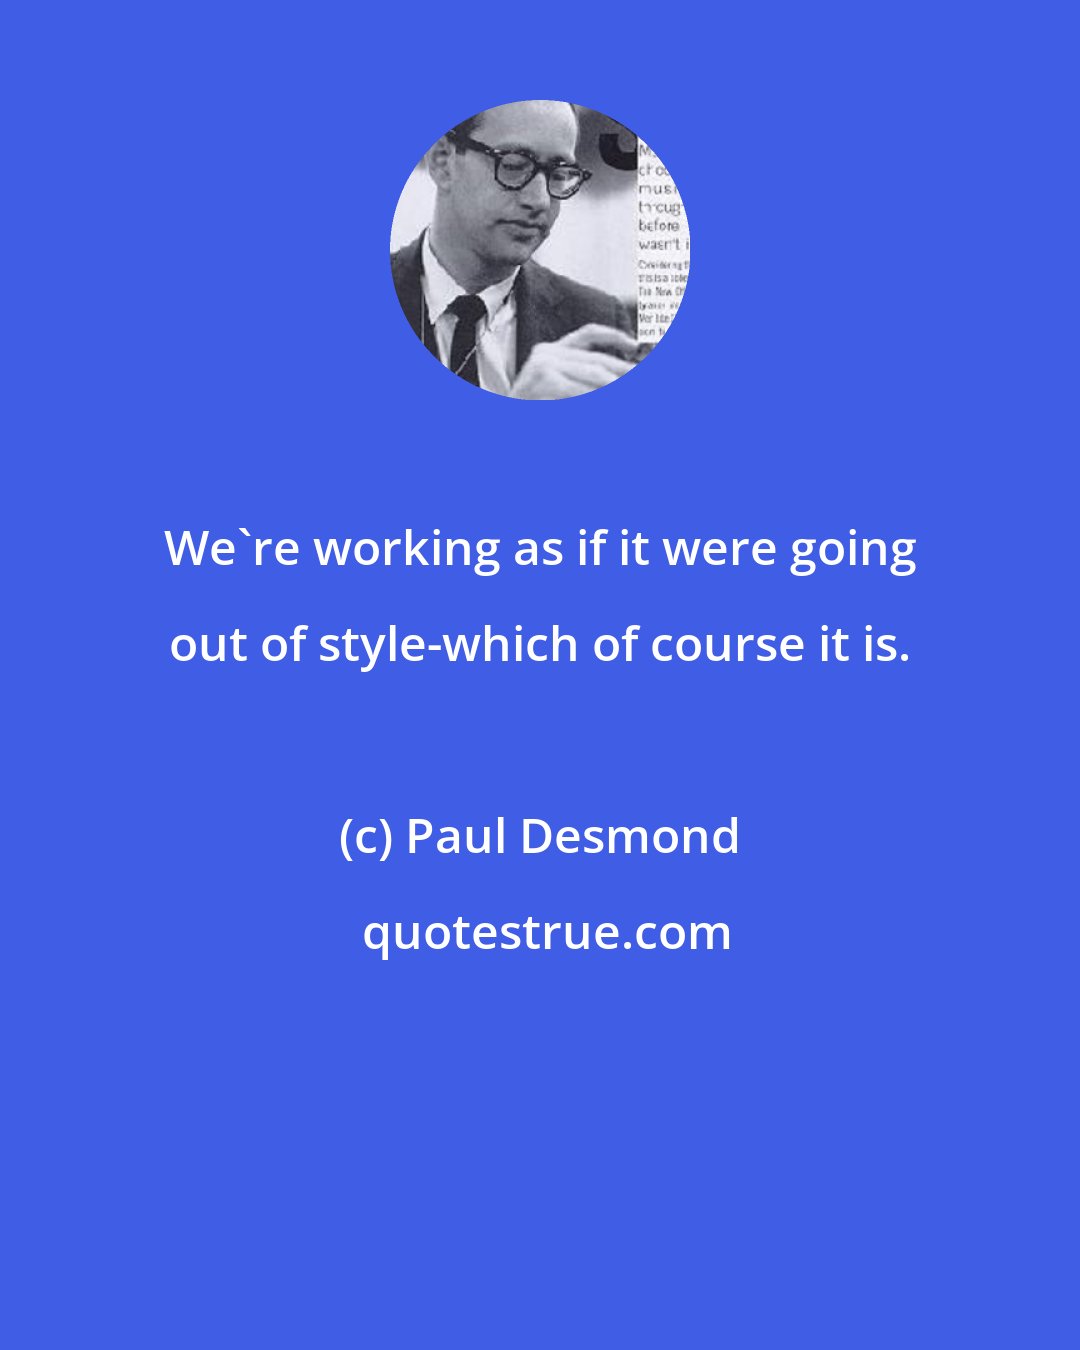 Paul Desmond: We're working as if it were going out of style-which of course it is.